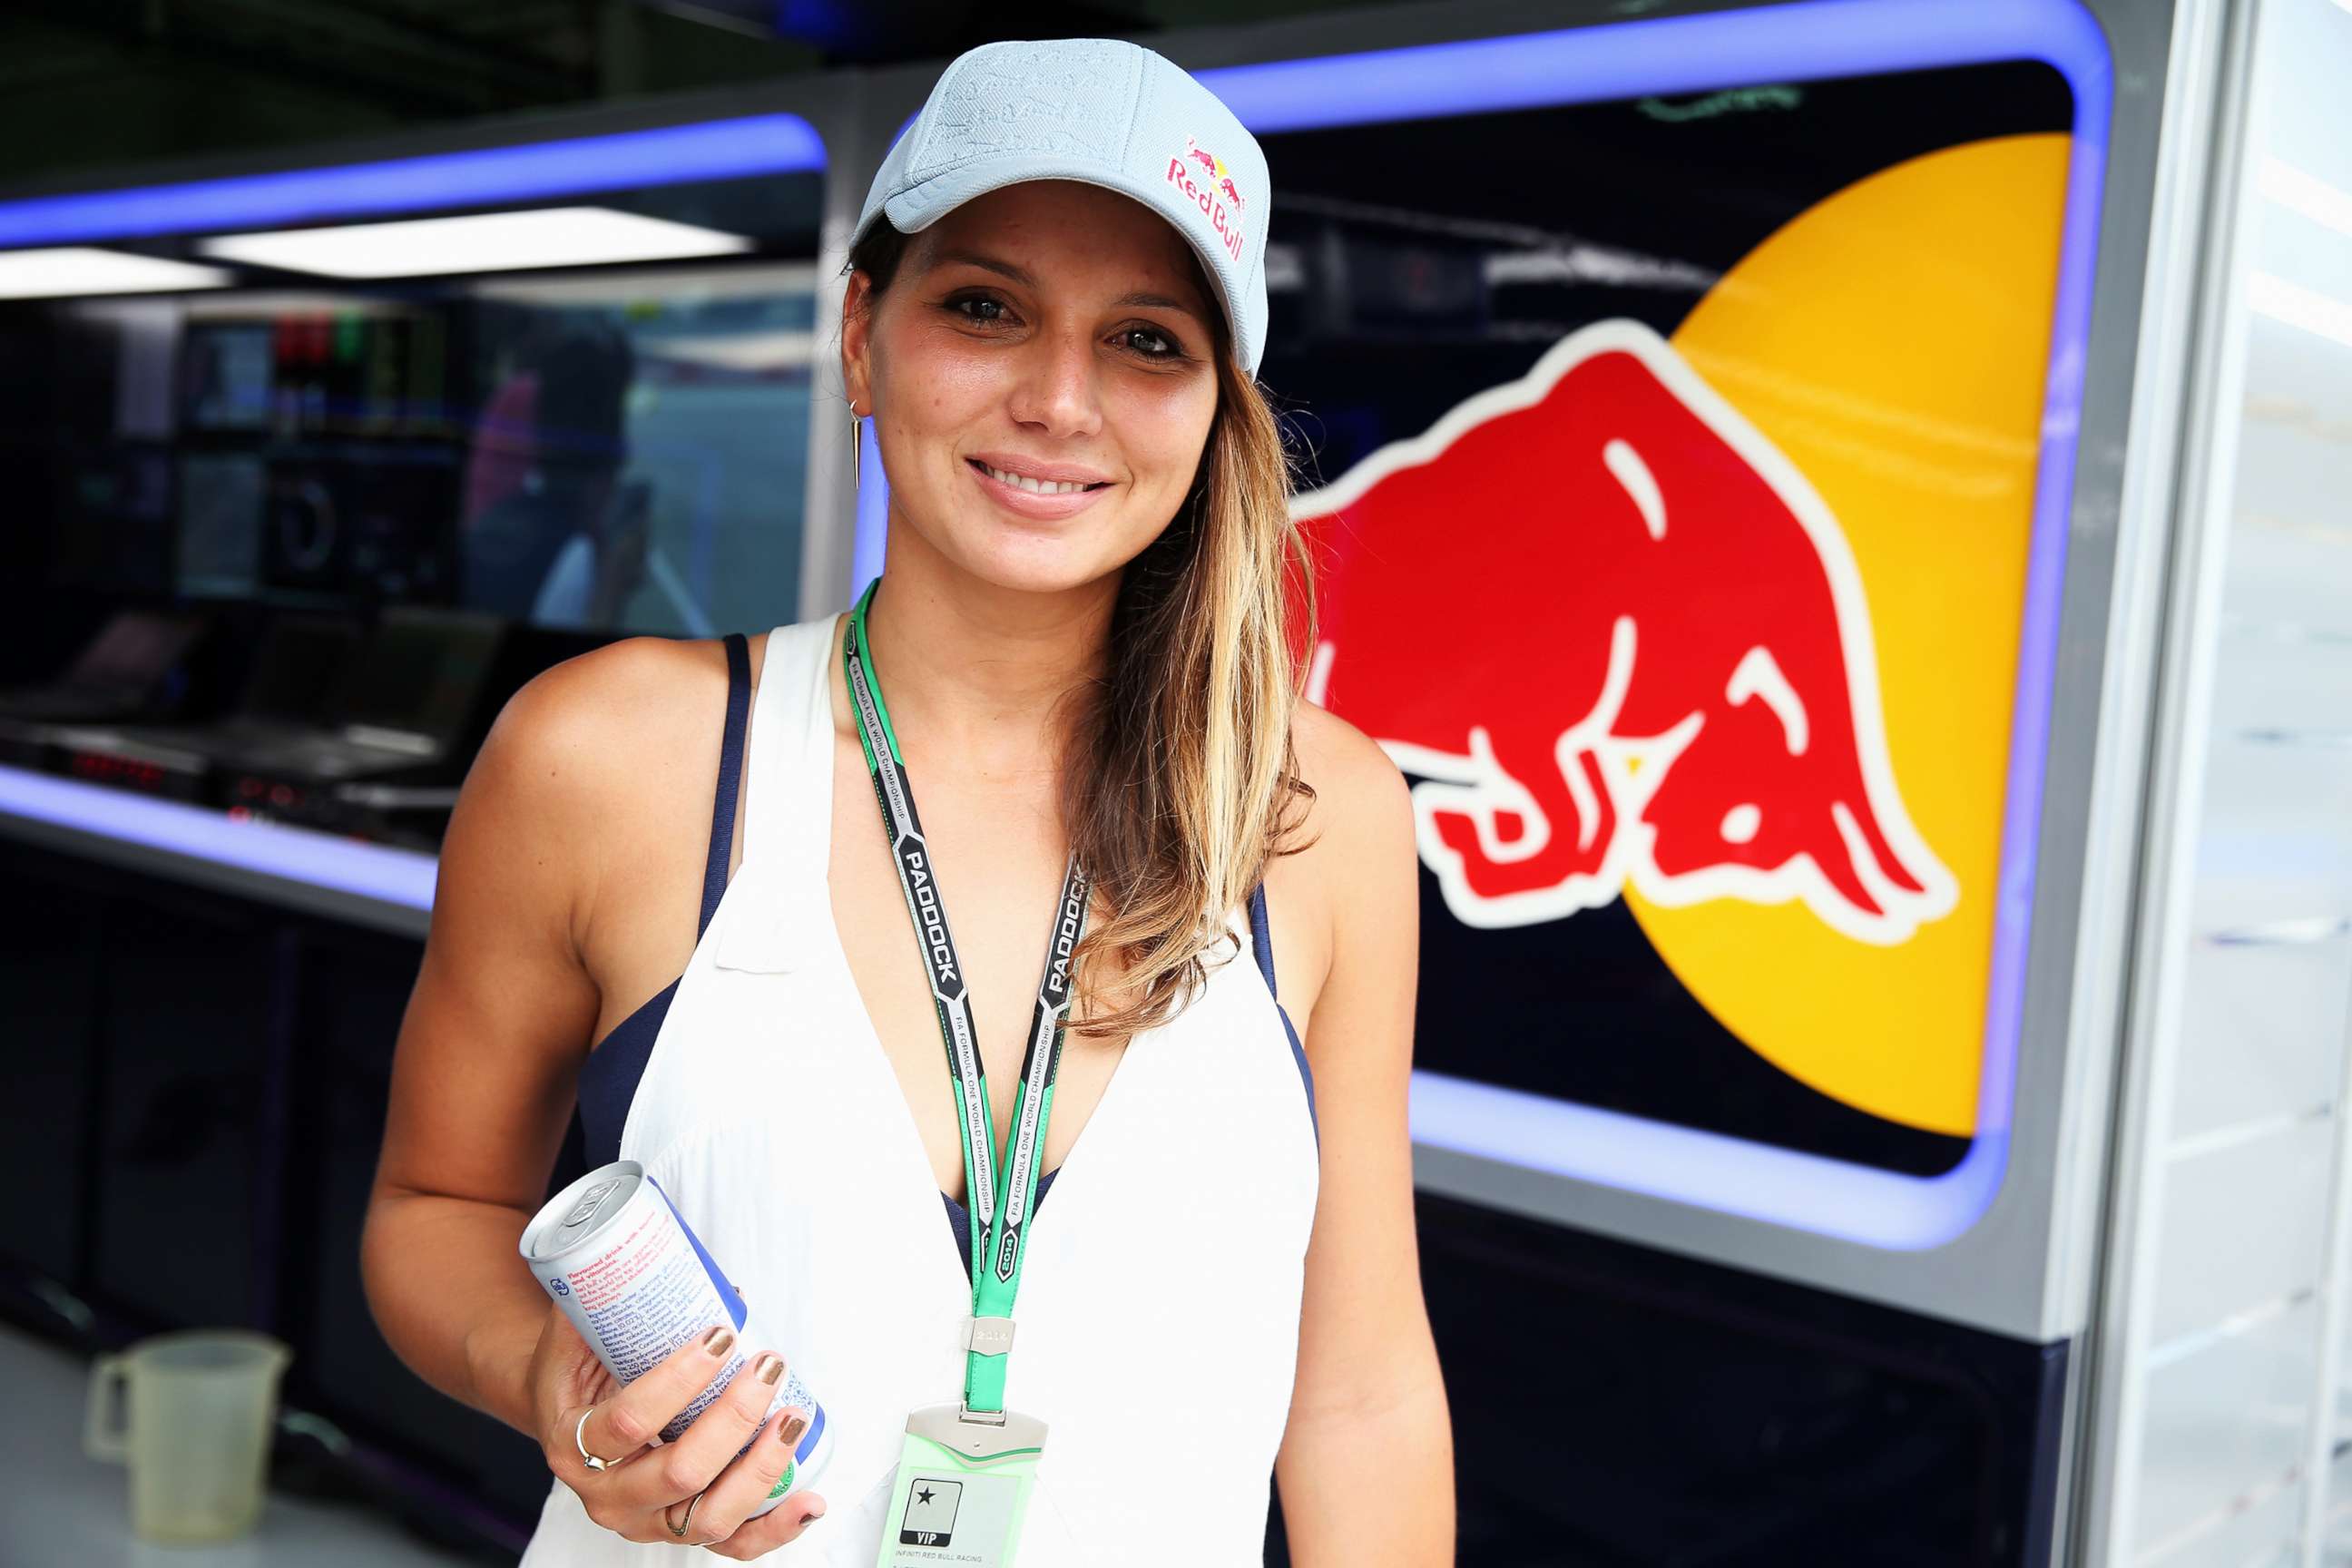 PHOTO: Surfer Maya Gabeira is seen in the Infiniti Red Bull Racing garage during practice for the Malaysia Formula One Grand Prix at the Sepang Circuit on March 28, 2014 in Kuala Lumpur, Malaysia.